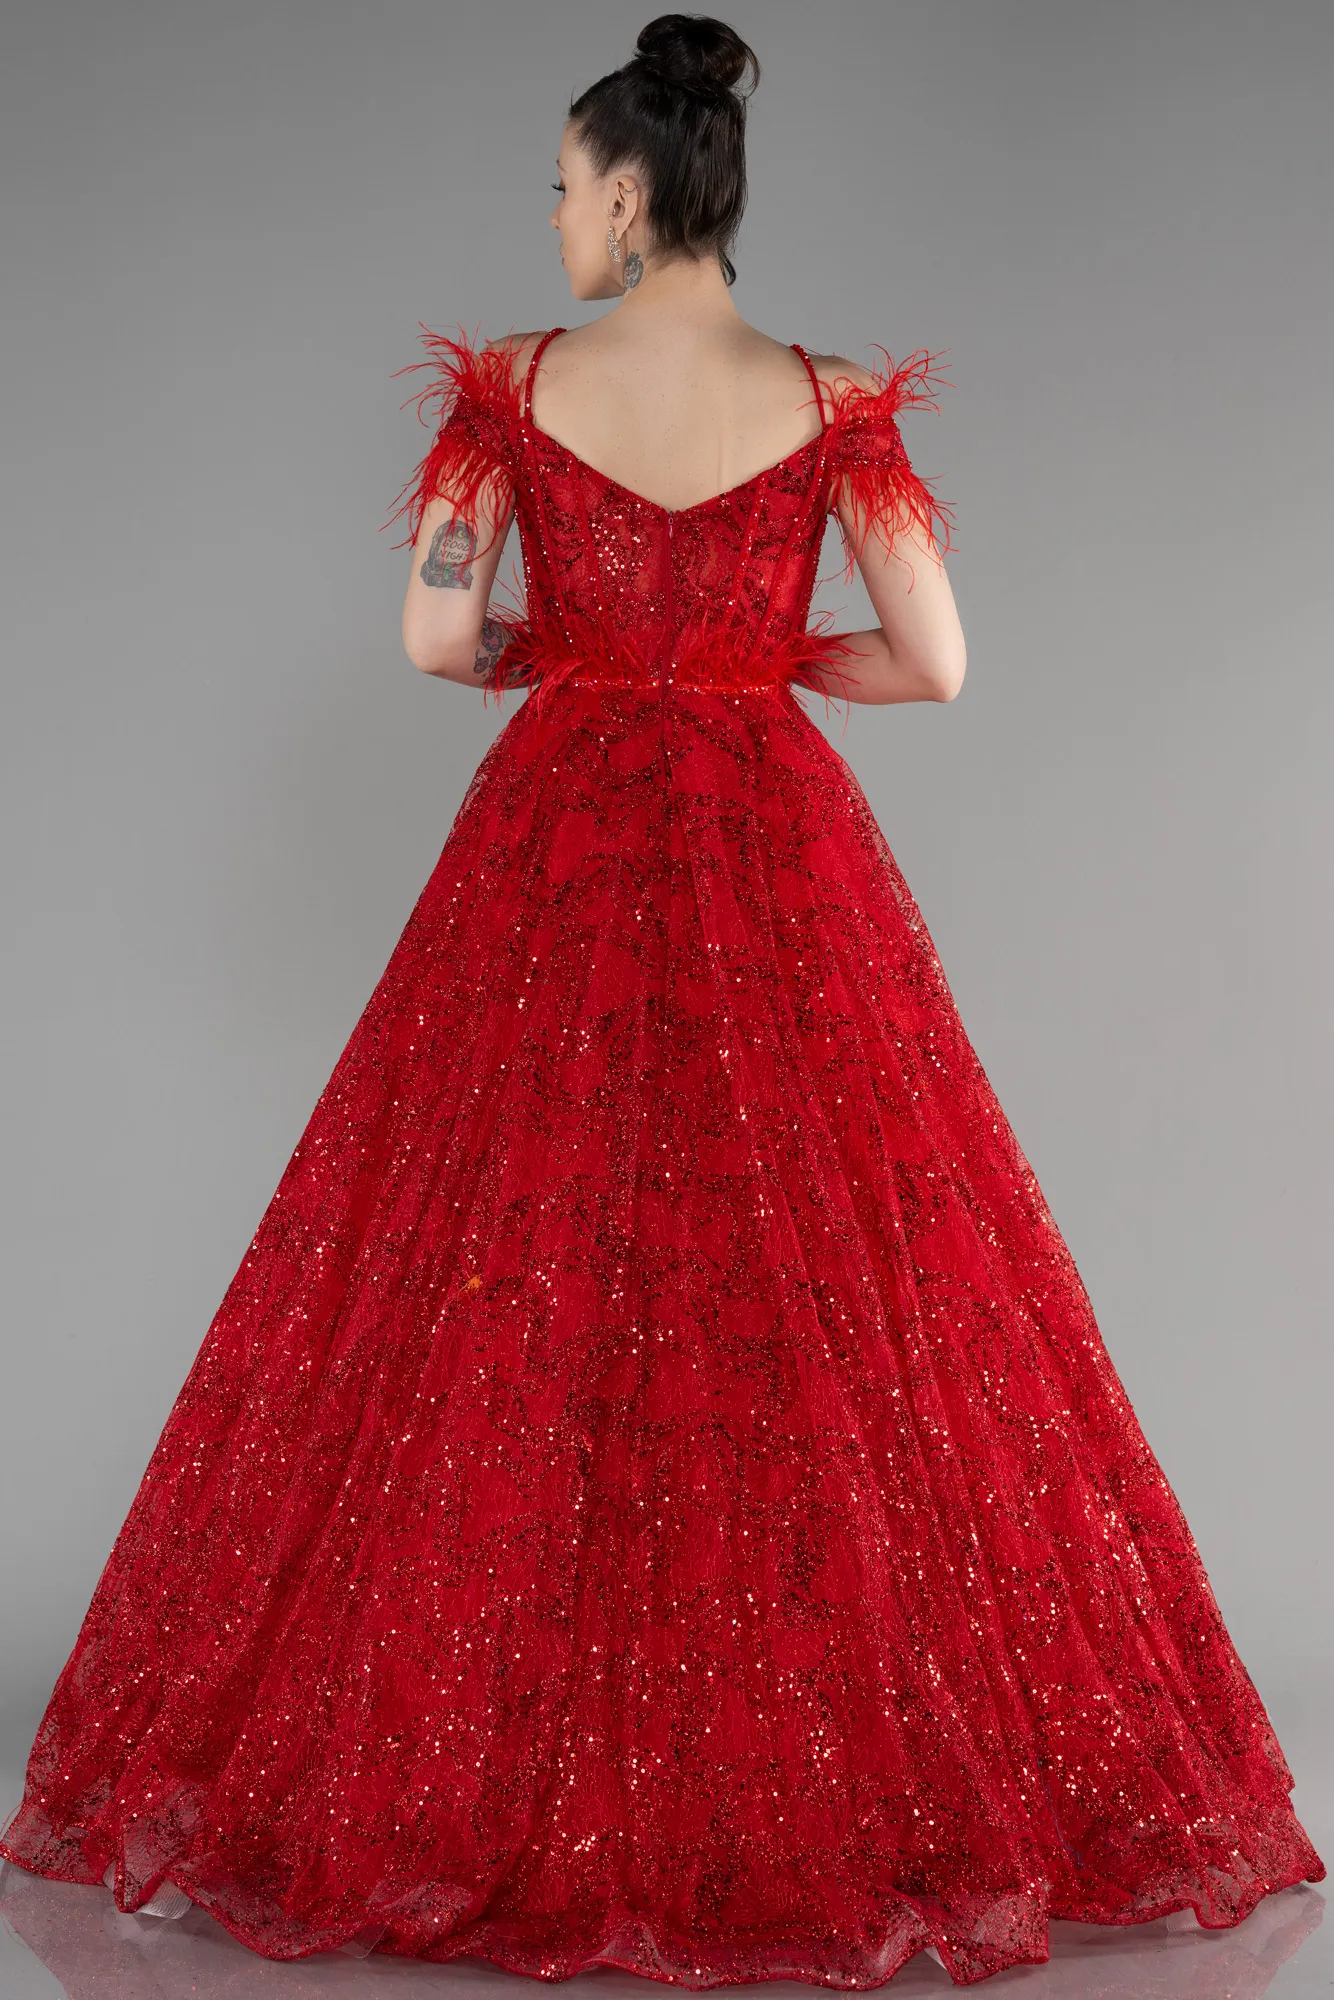 Red-Long Special Design Engagement Dress ABU3555